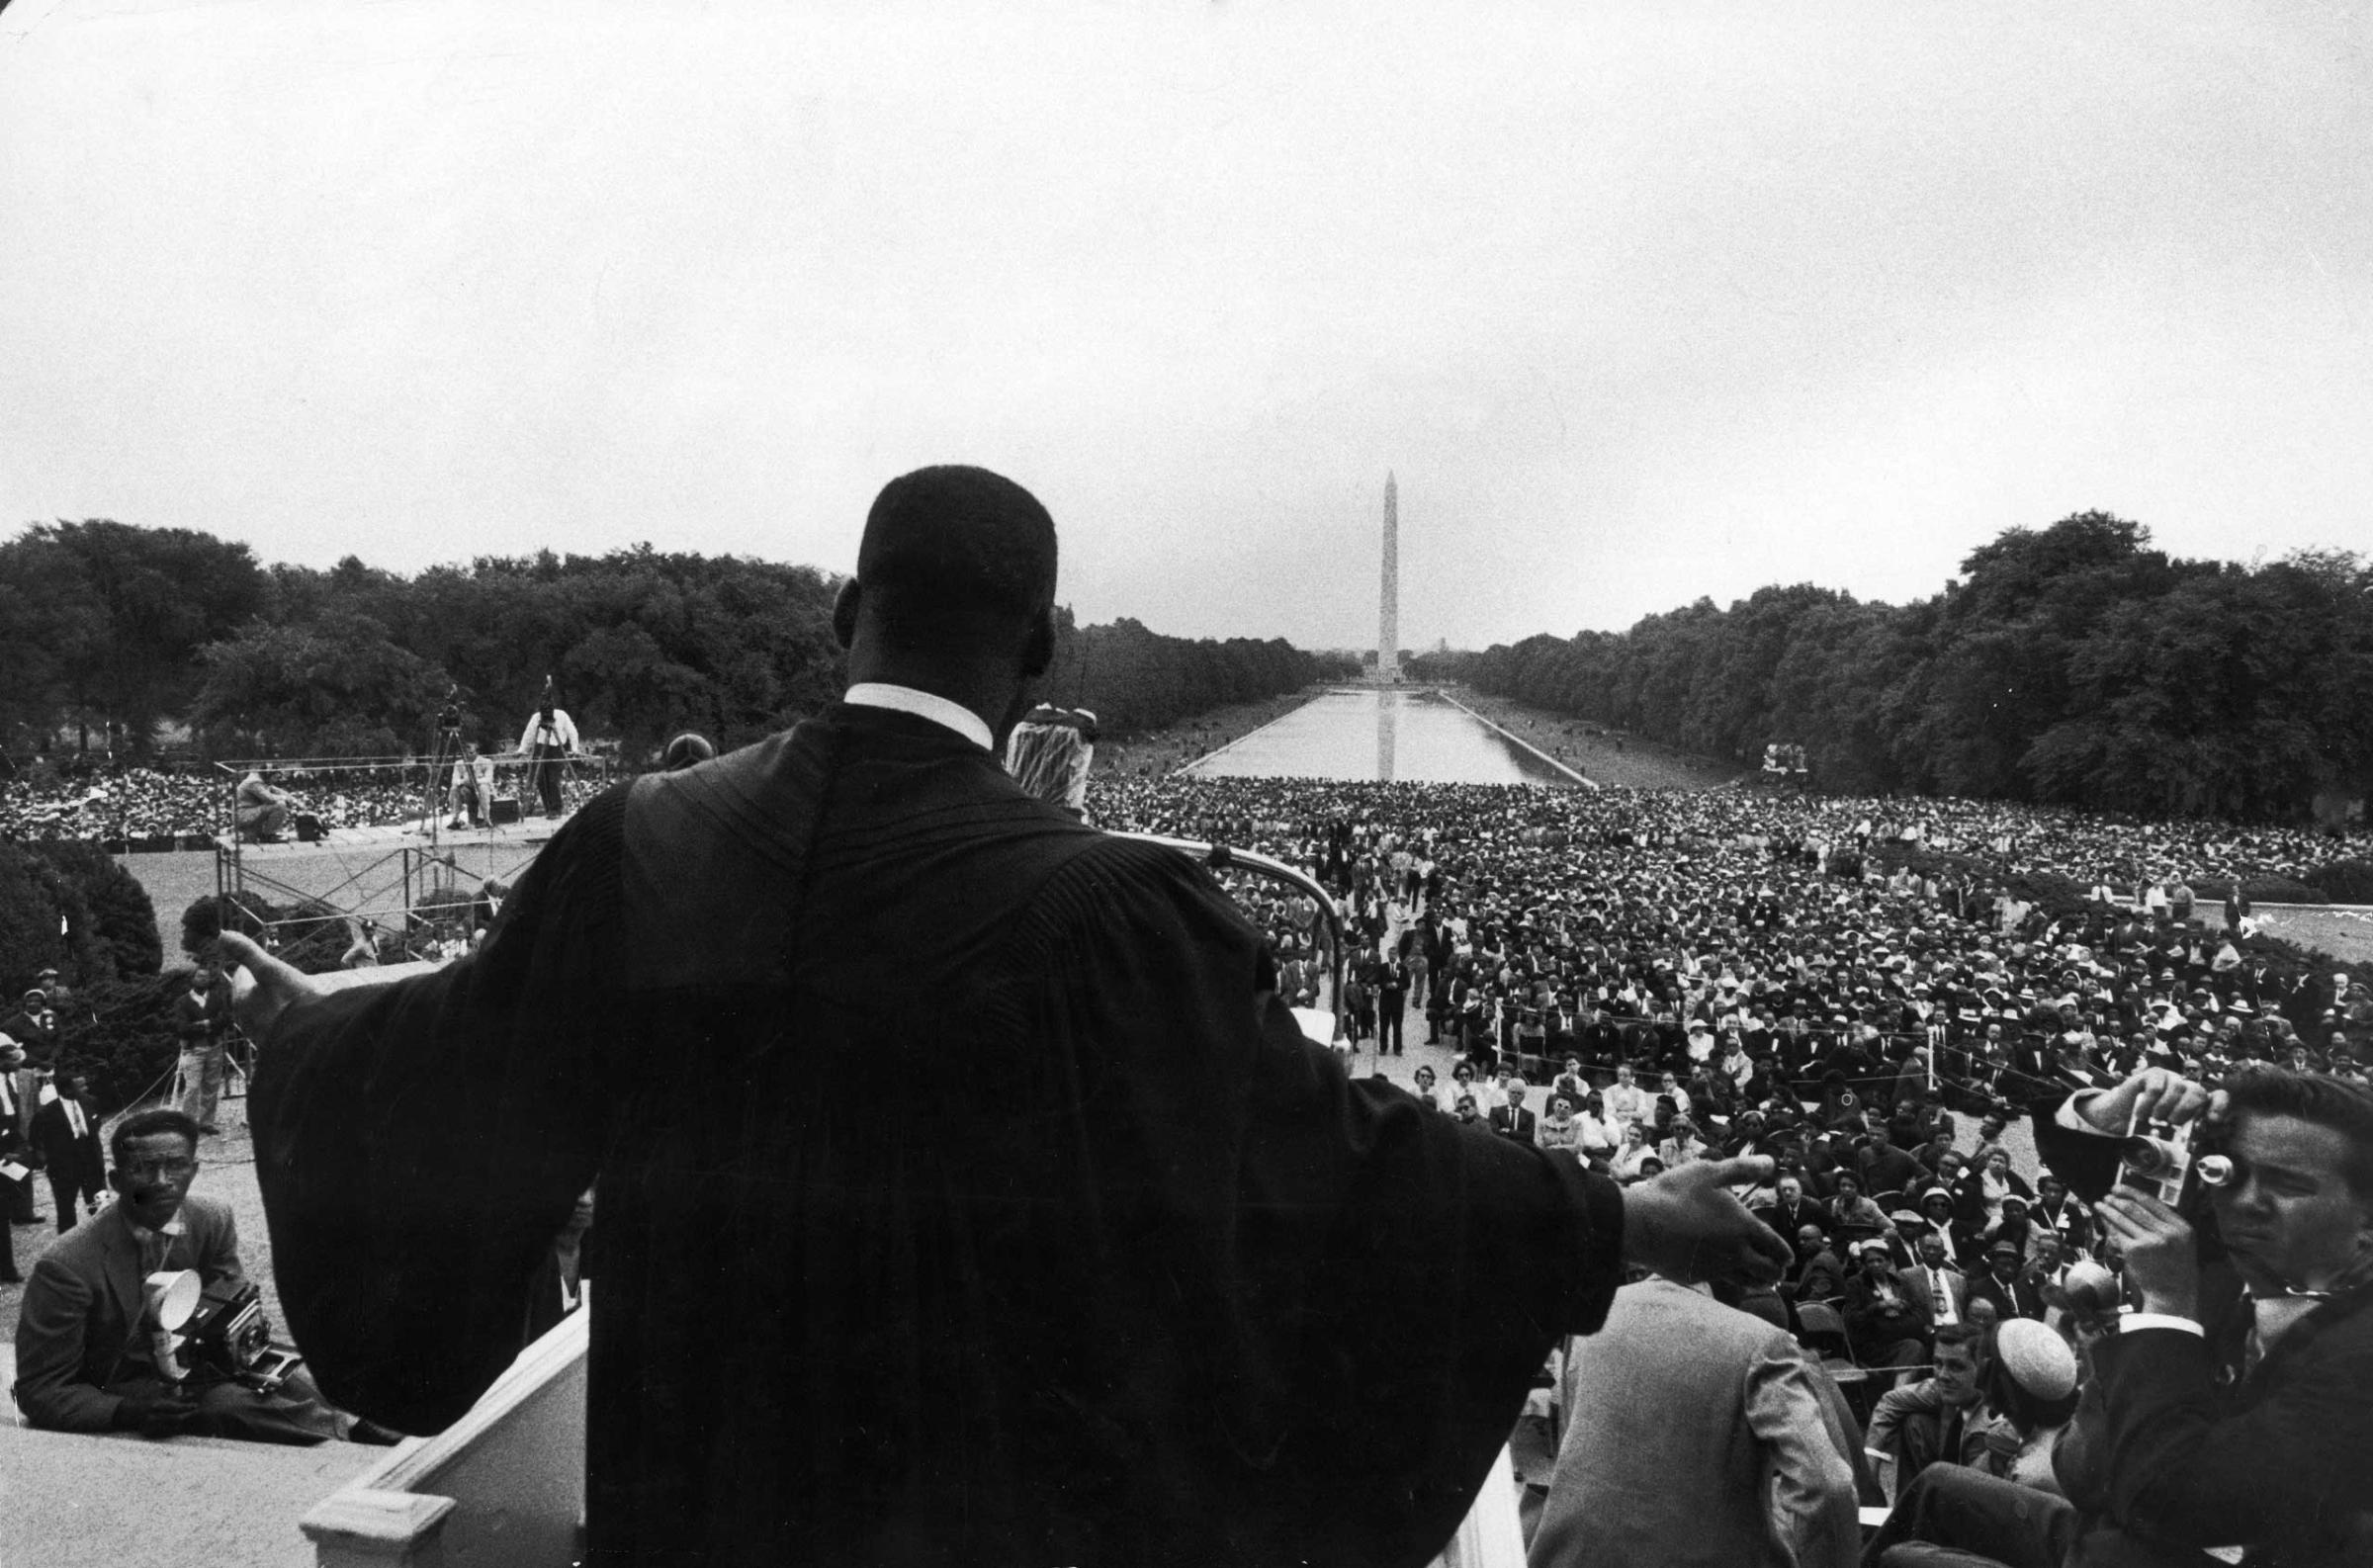 Reverend Martin Luther King Jr. speaks at the landmark Prayer Pilgrimage for Freedom in Washington, DC, one of the earliest mass rallies of the burgeoning Civil Rights Movement. Paul Schutzer took this photograph in 1957, but it did not appear in LIFE until the April 12, 1968, issue — one week after Dr. King was assassinated.